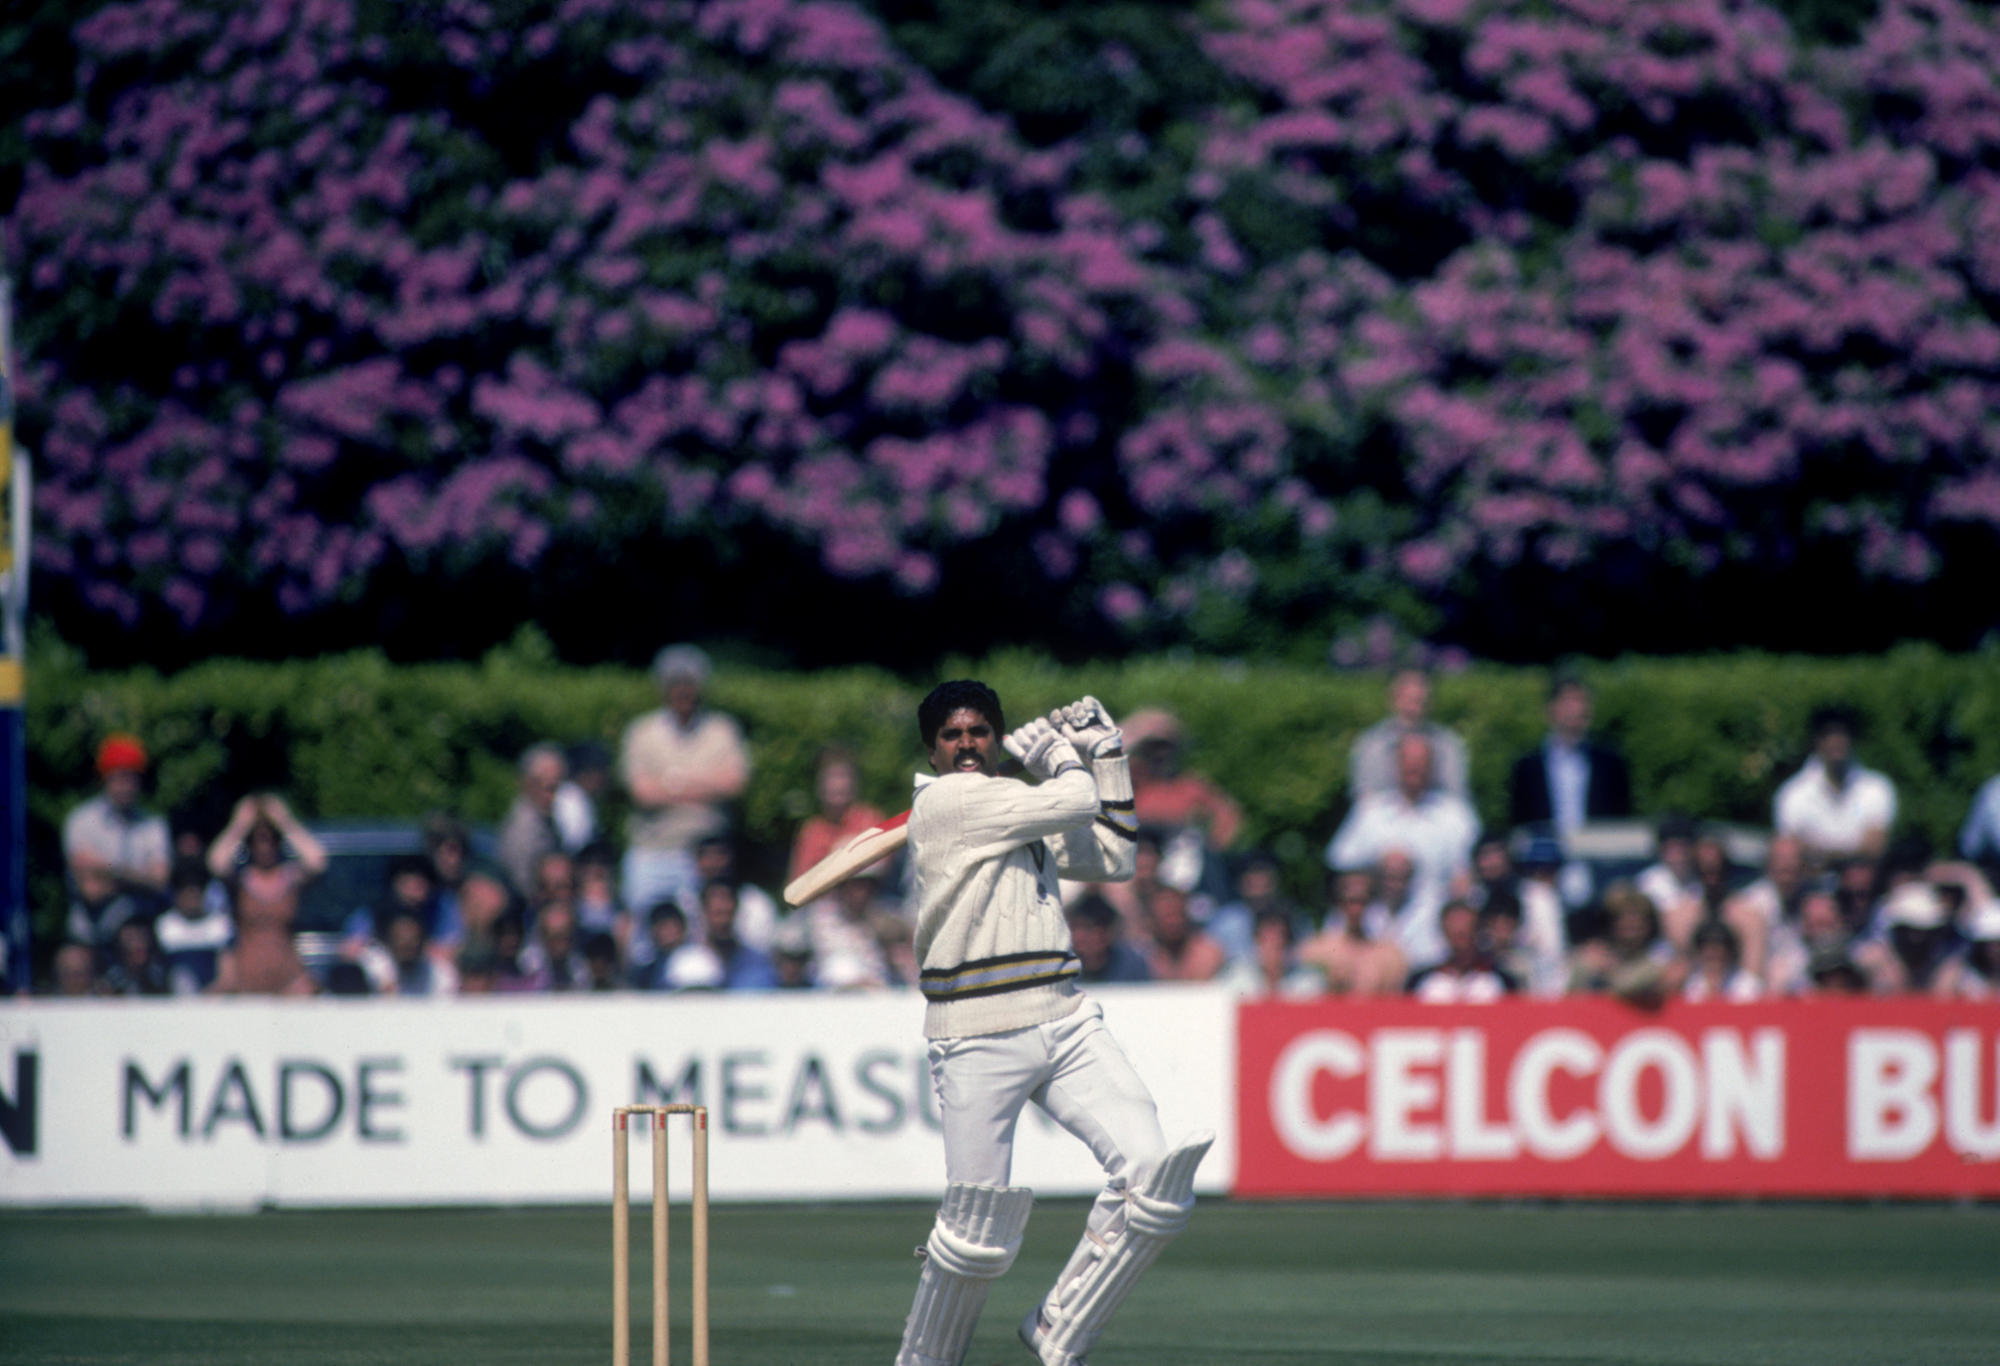 Indian cricket captain Kapil Dev during his record innings of 175 not out off 138 balls against Zimbabwe in the Cricket World Cup at Nevill Ground, Tunbridge Wells, Kent, 18th June 1983. India won the match by 31 runs and later won the tournament.